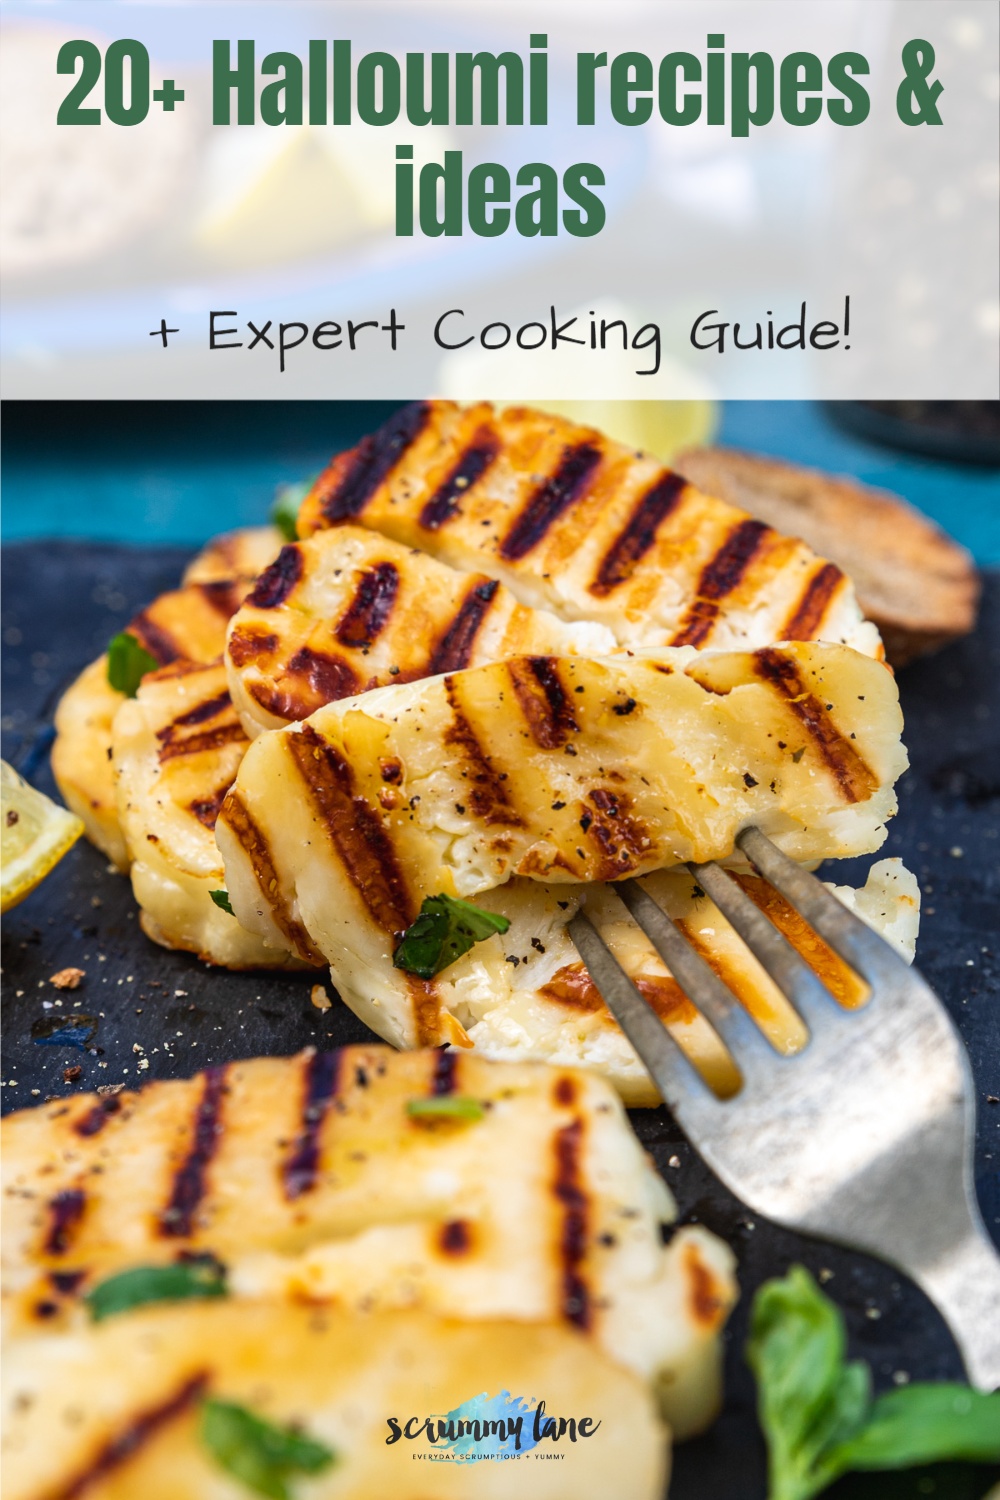 Closeup of someone picking up a slice of cooked halloumi from a platter with a title on it that says 20+ halloumi recipes and ideas + expert cooking guide for Pinterest